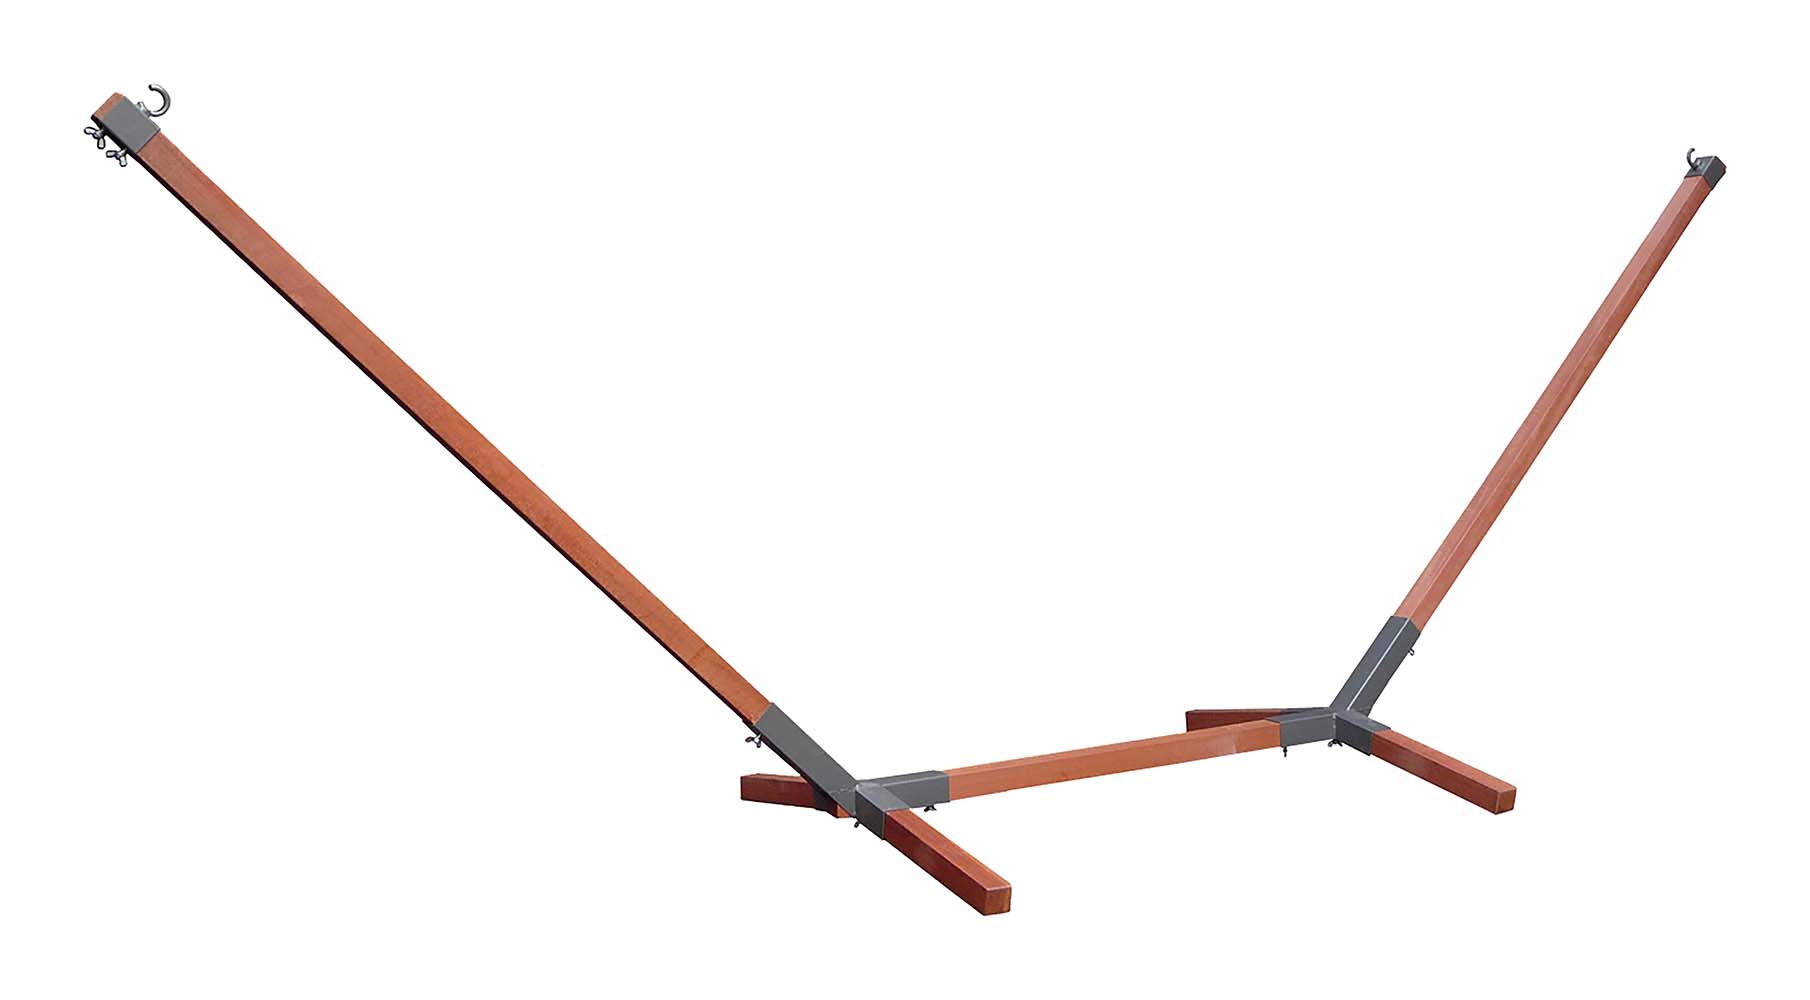 7100250 A hardwood hammock stand. Made of Massaranduba FSC Pure solid wood. Suitable for hammocks with a total length of maximum 325 centimetres. Adjustable in height to a maximum of 115 centimetres, while the span is adjustable from 310 to 335 centimetres. Maximum load-bearing capacity: 120 kilograms.